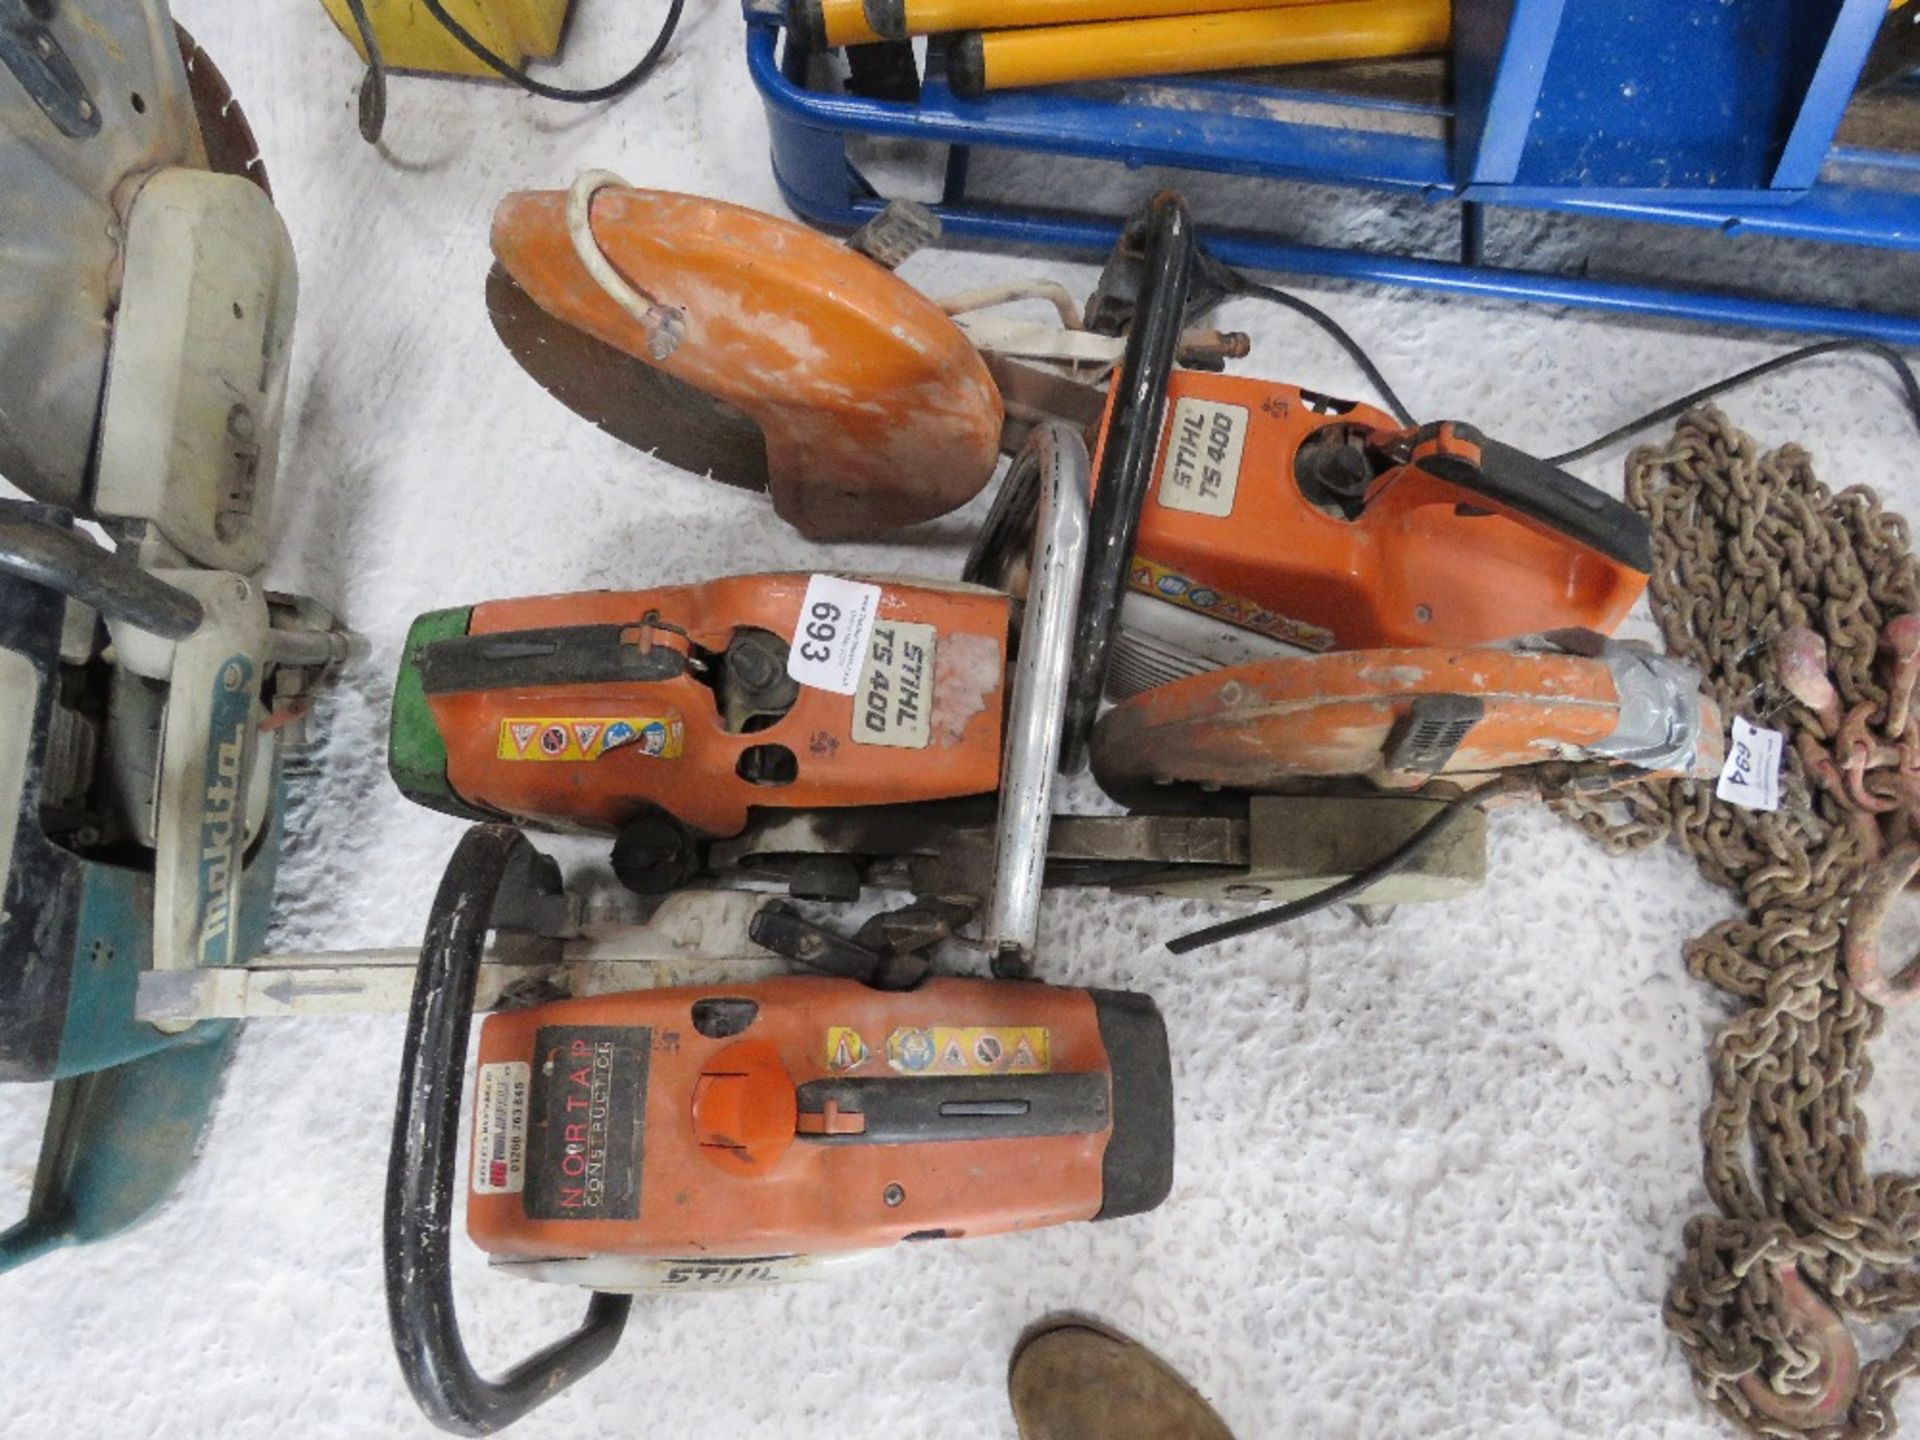 3 X STIHL TS400 PETROL SAWS FOR SPARES OR REPAIR.....THIS LOT IS SOLD UNDER THE AUCTIONEERS MARGIN S